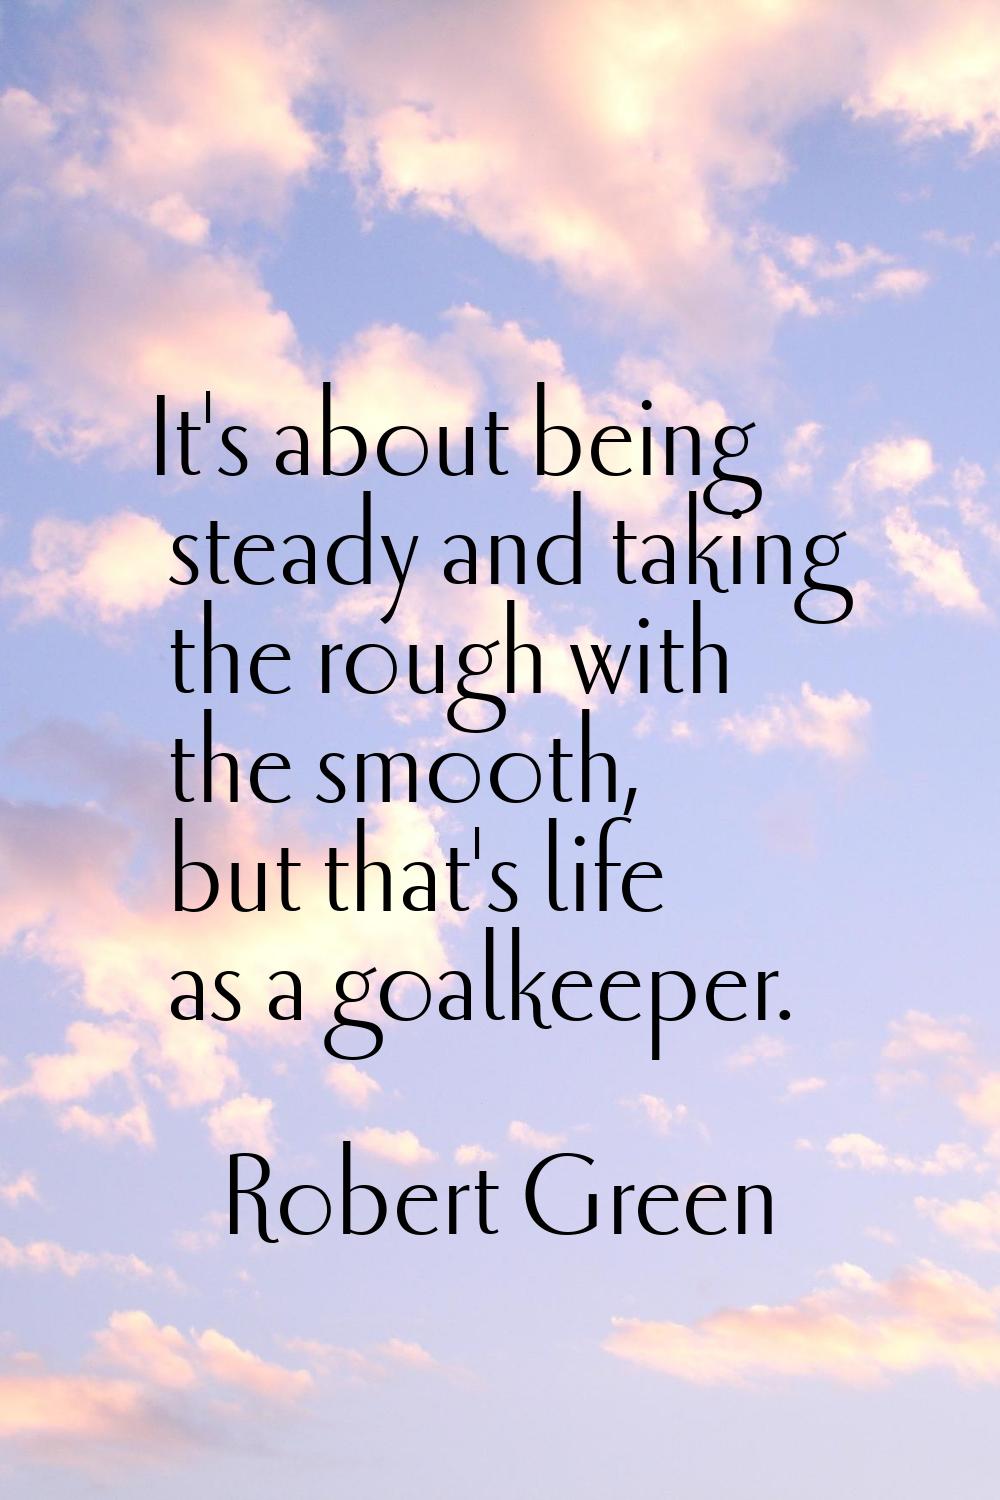 It's about being steady and taking the rough with the smooth, but that's life as a goalkeeper.